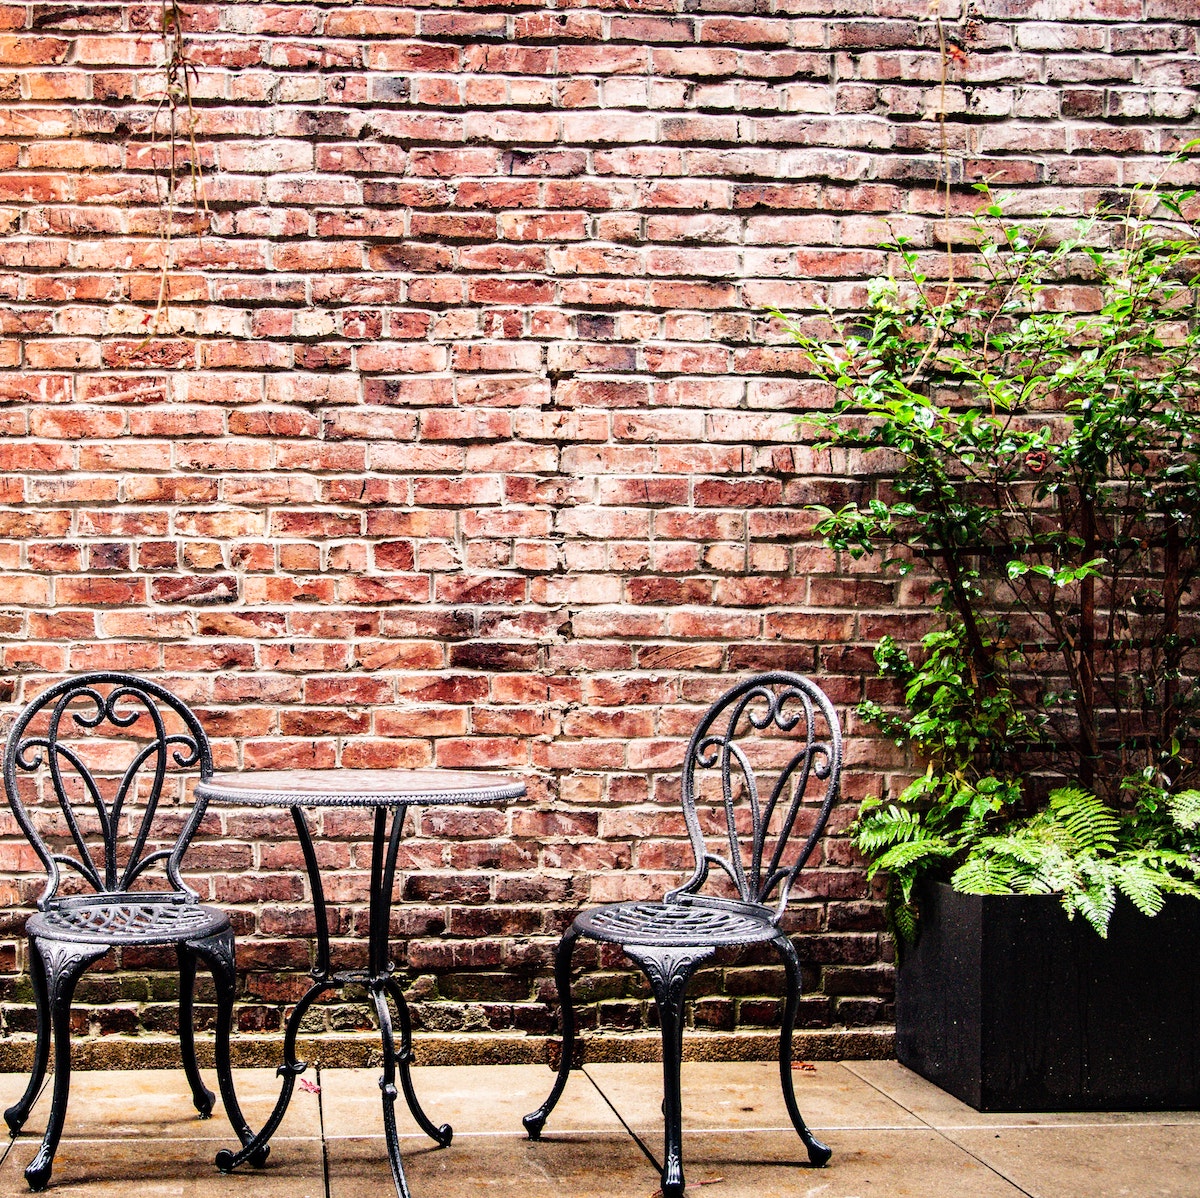 How to clean wrought iron outdoor furniture